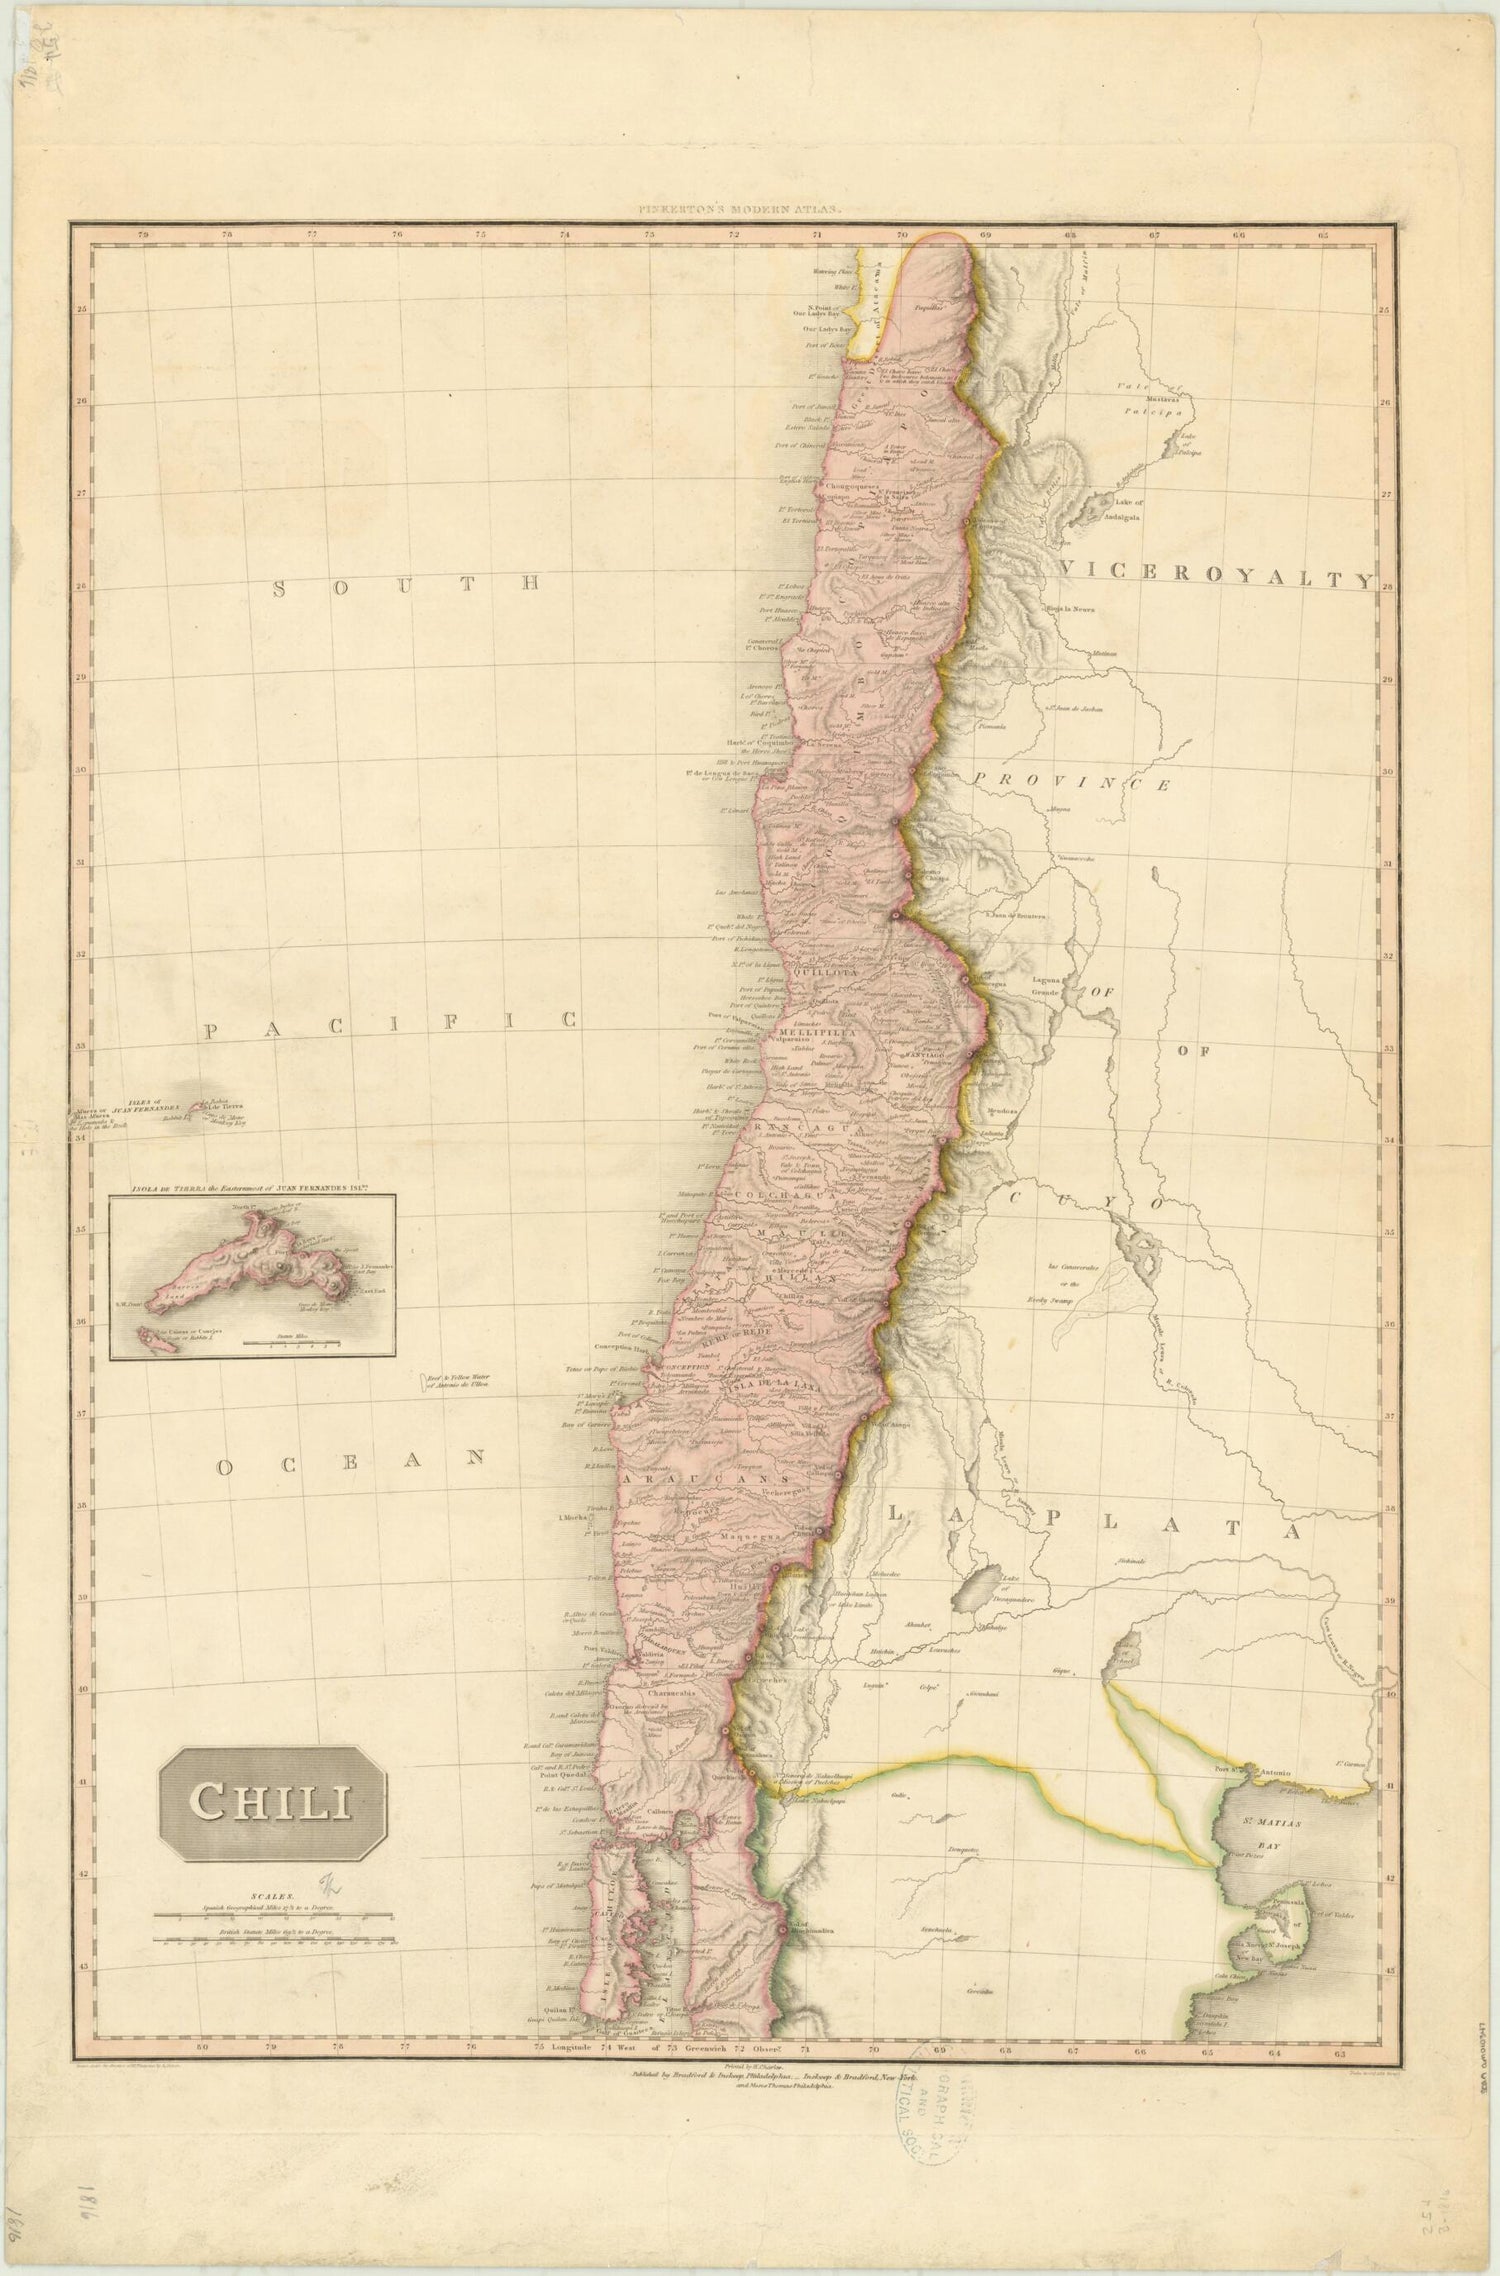 This old map of Chile, from 1816. (Chili) was created by H. Charles, L. Hebert, Samuel John Neele, John Pinkerton in 1816